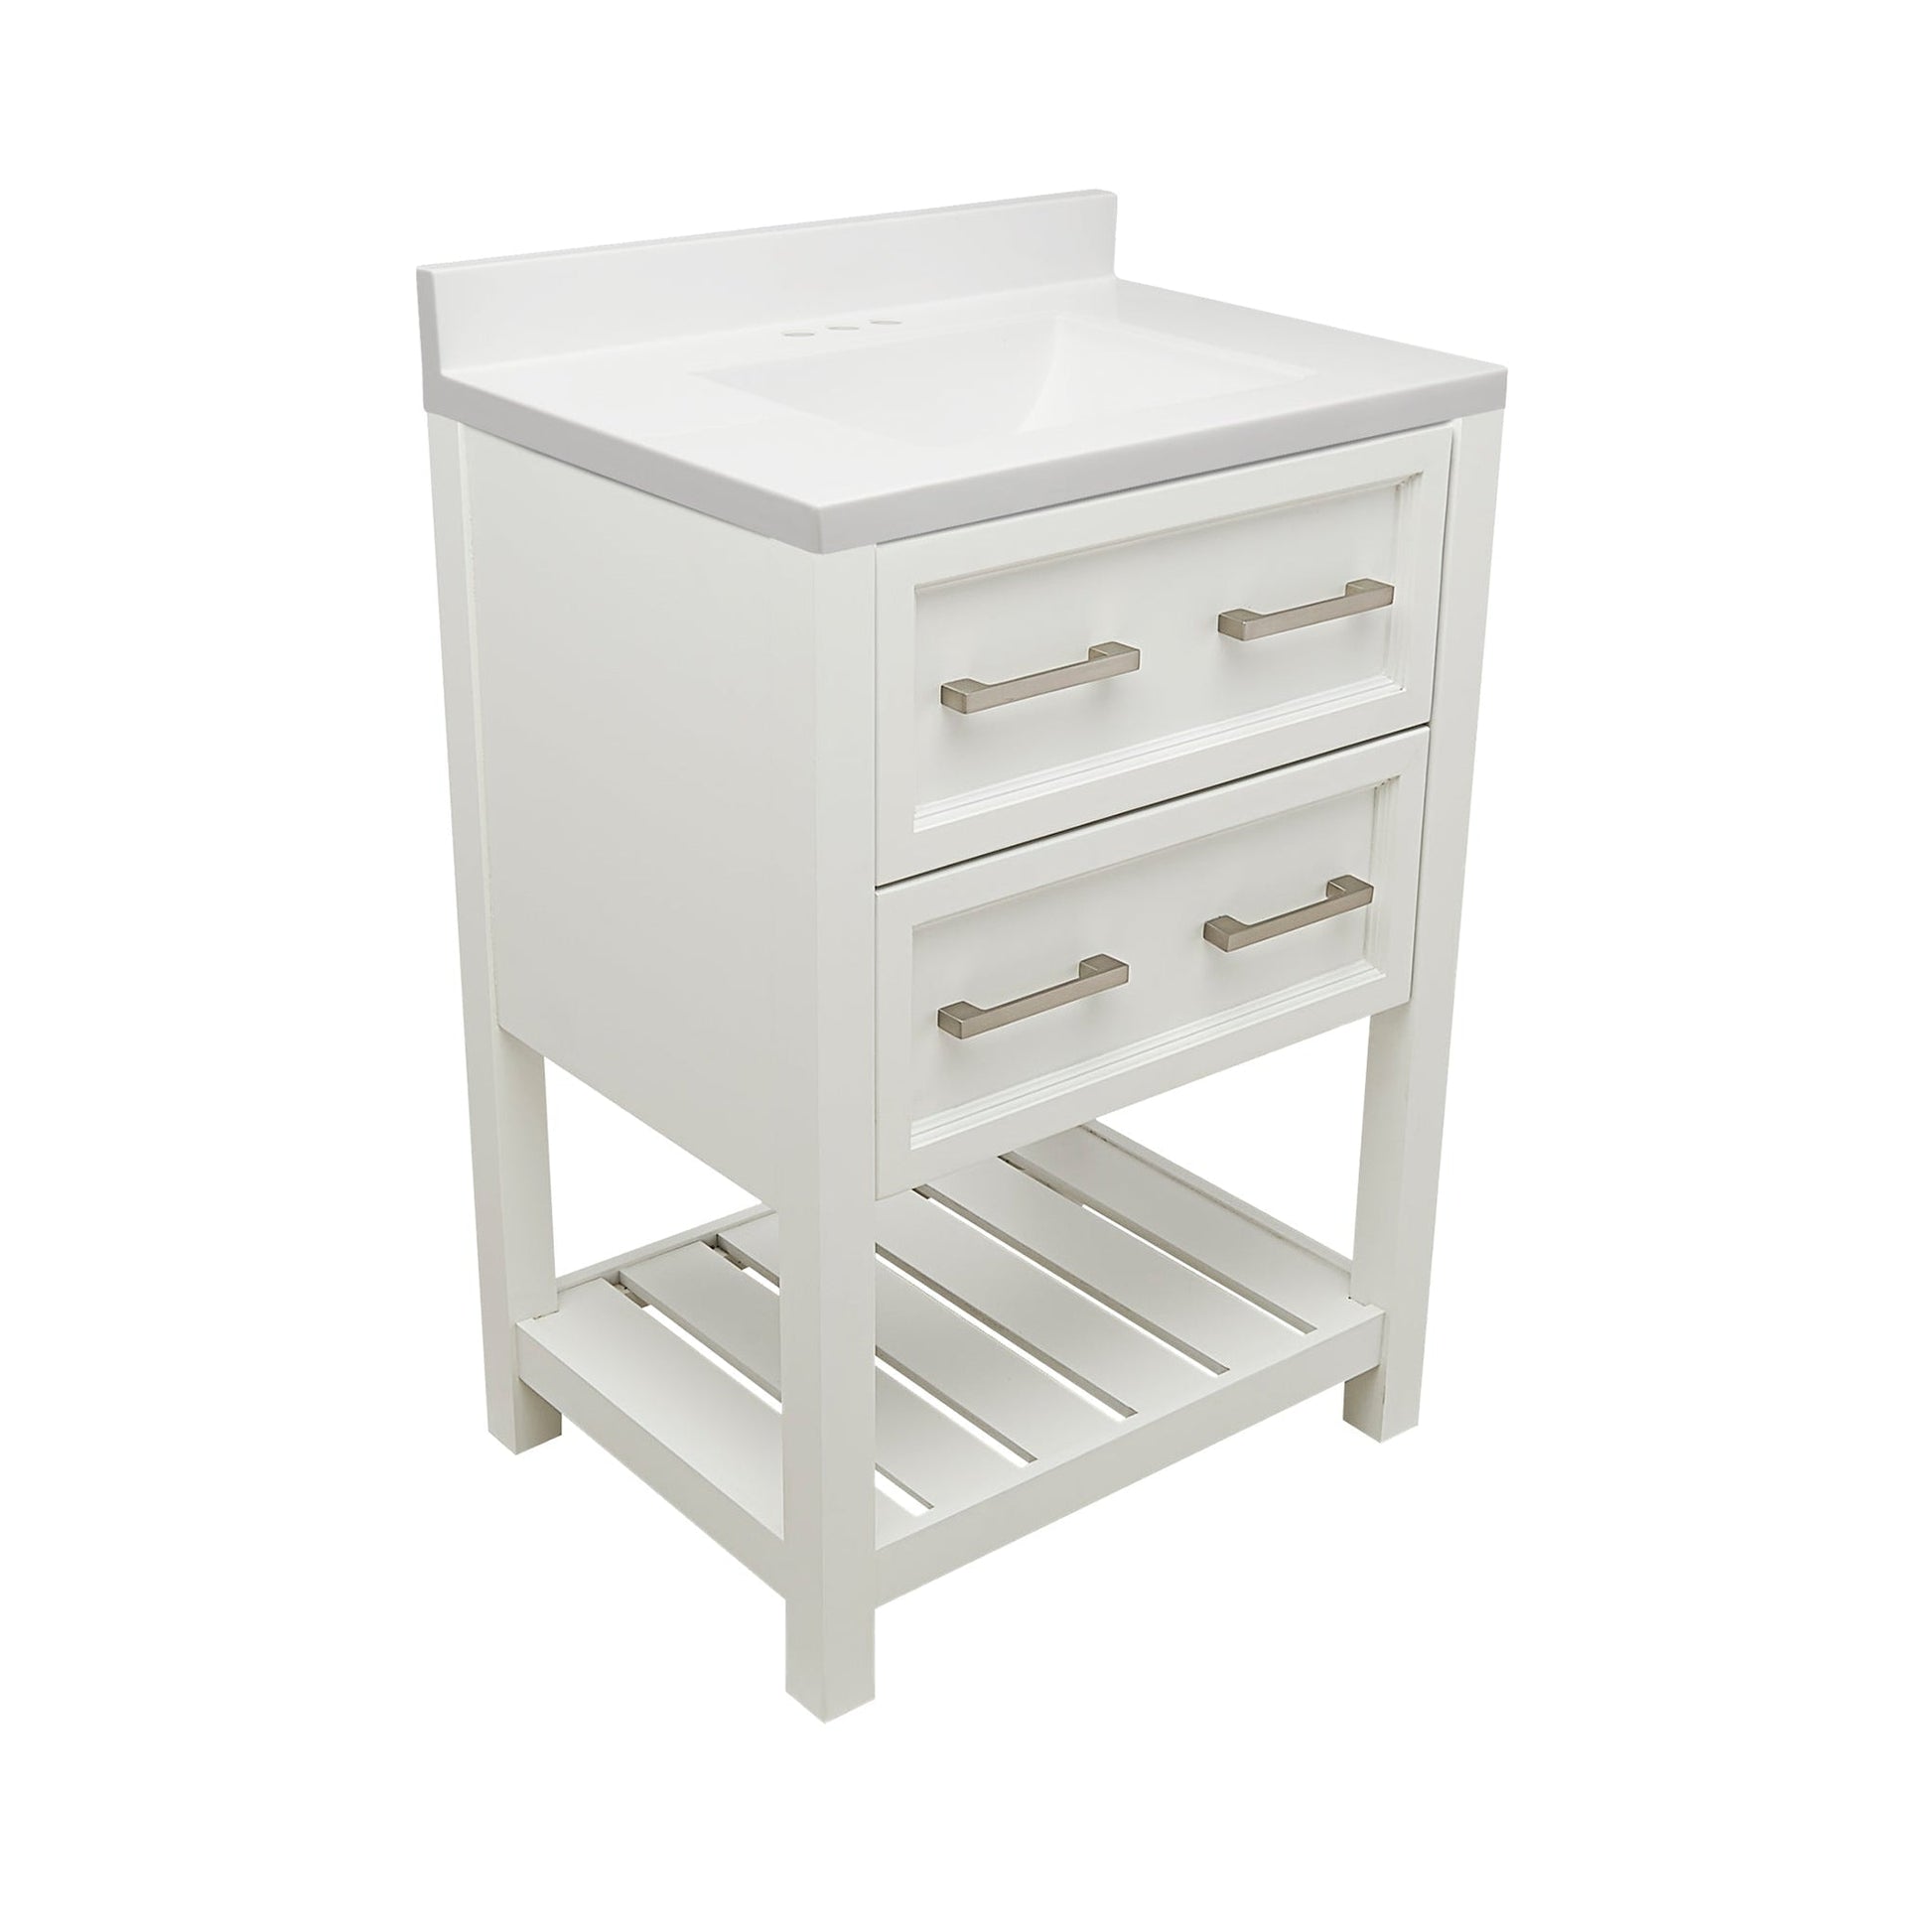 Ella's Bubbles Tremblant 25" White Bathroom Vanity With White Cultured Marble Top With White Backsplash and Sink